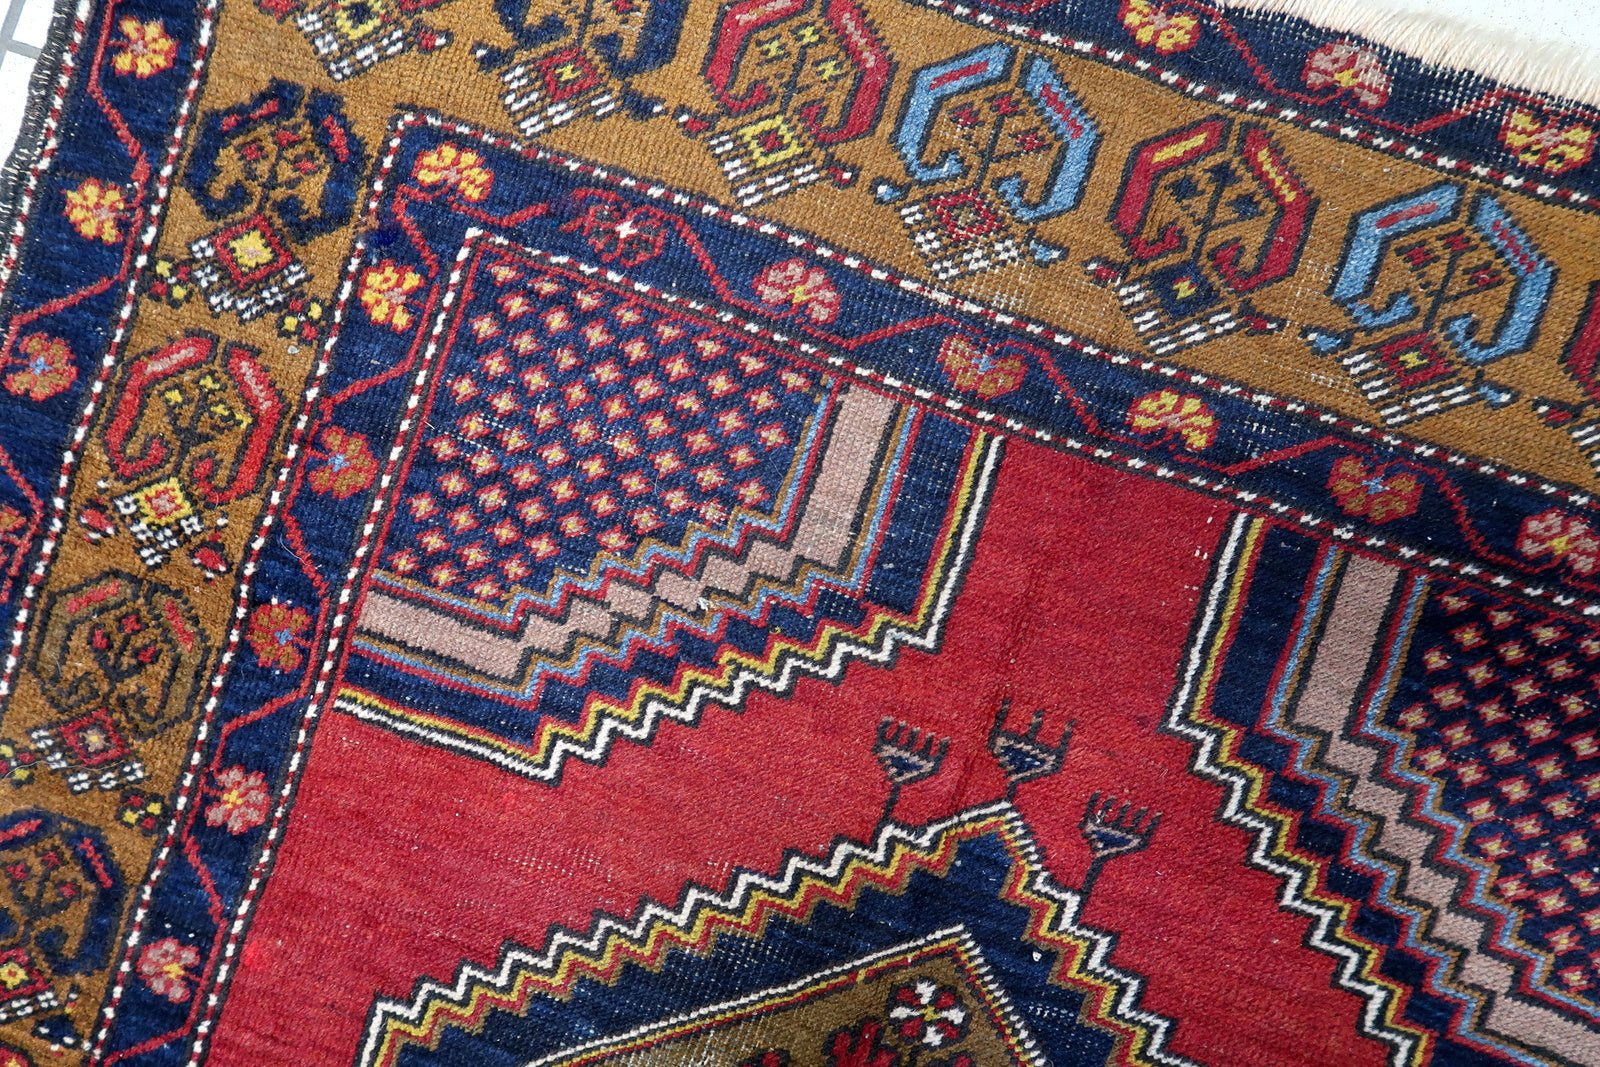 Side view of the medium-sized rectangular rug made from high-quality wool fibers